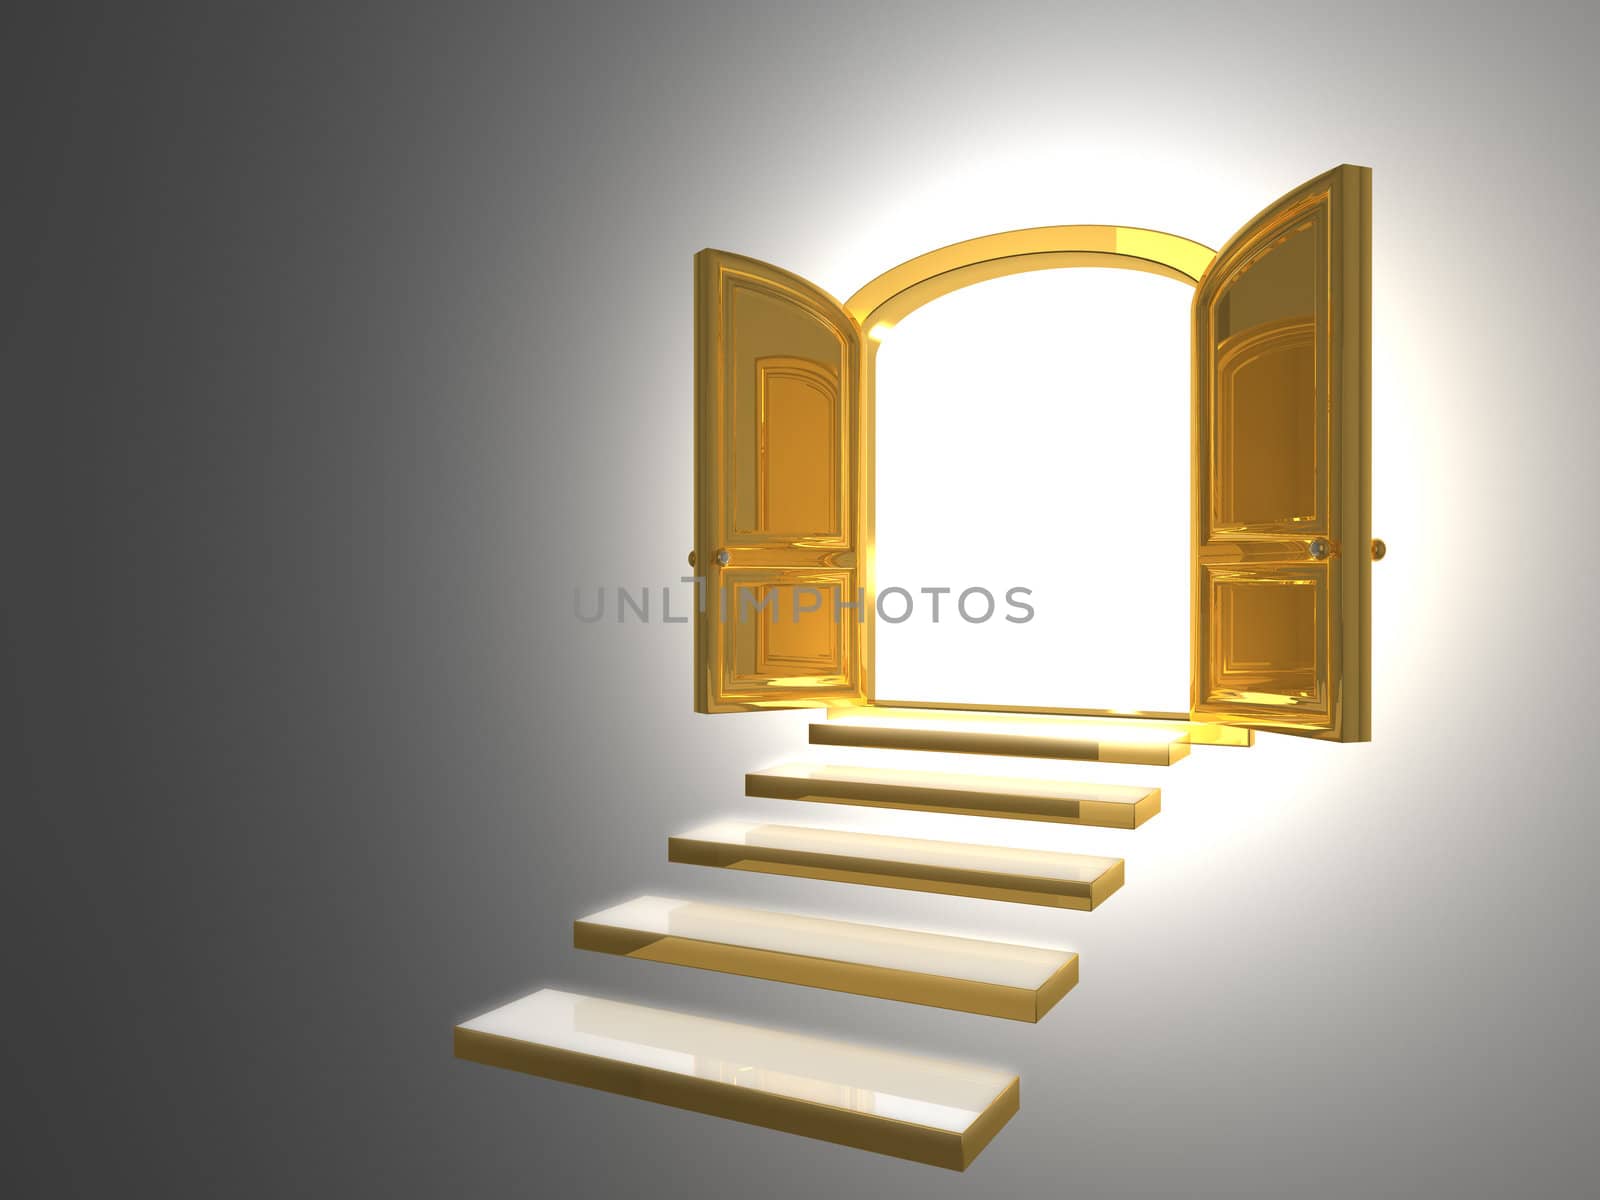 Big Golden Door opened on white by shkyo30